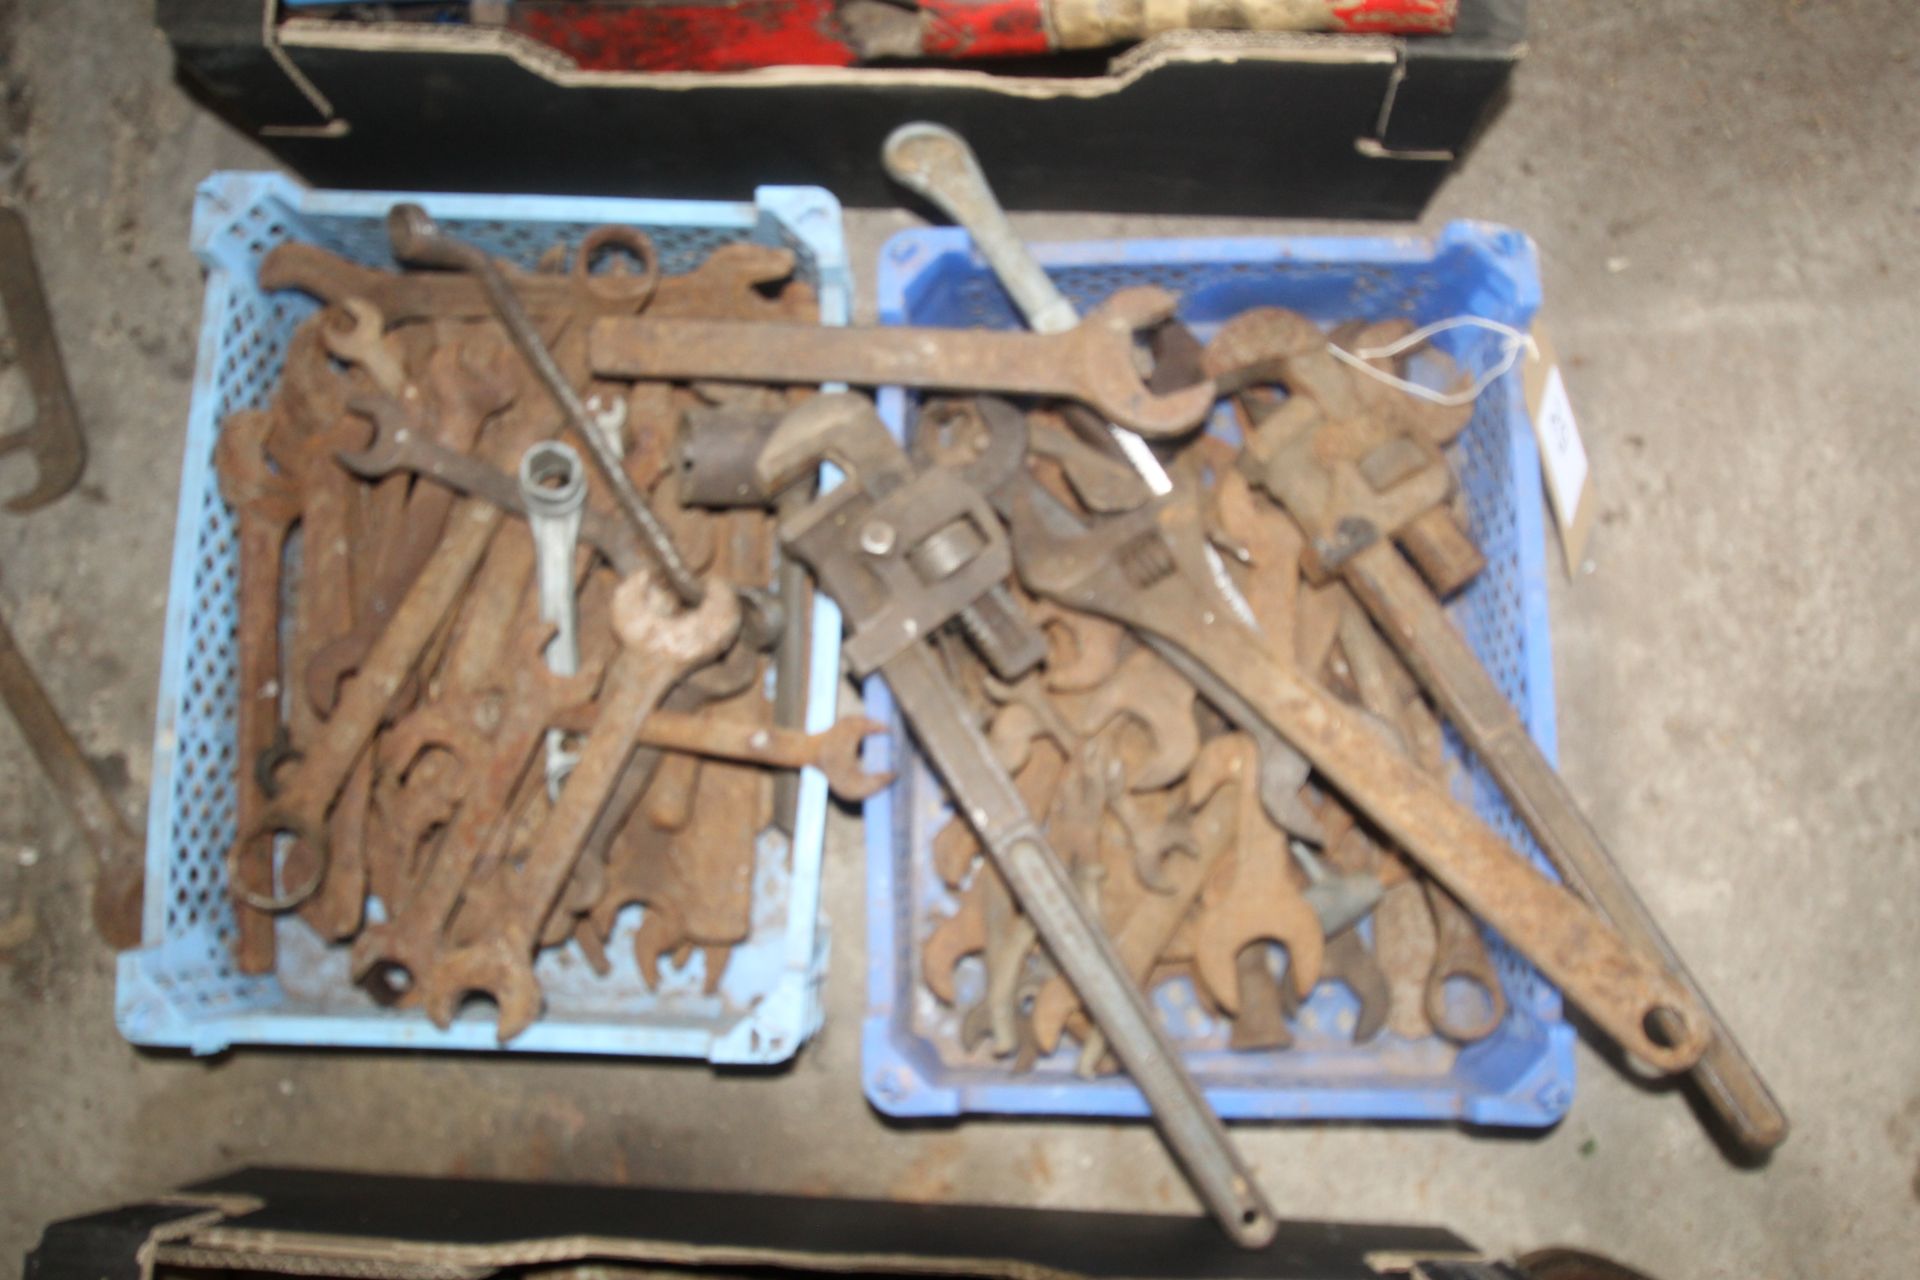 2x trays of various vintage spanners.